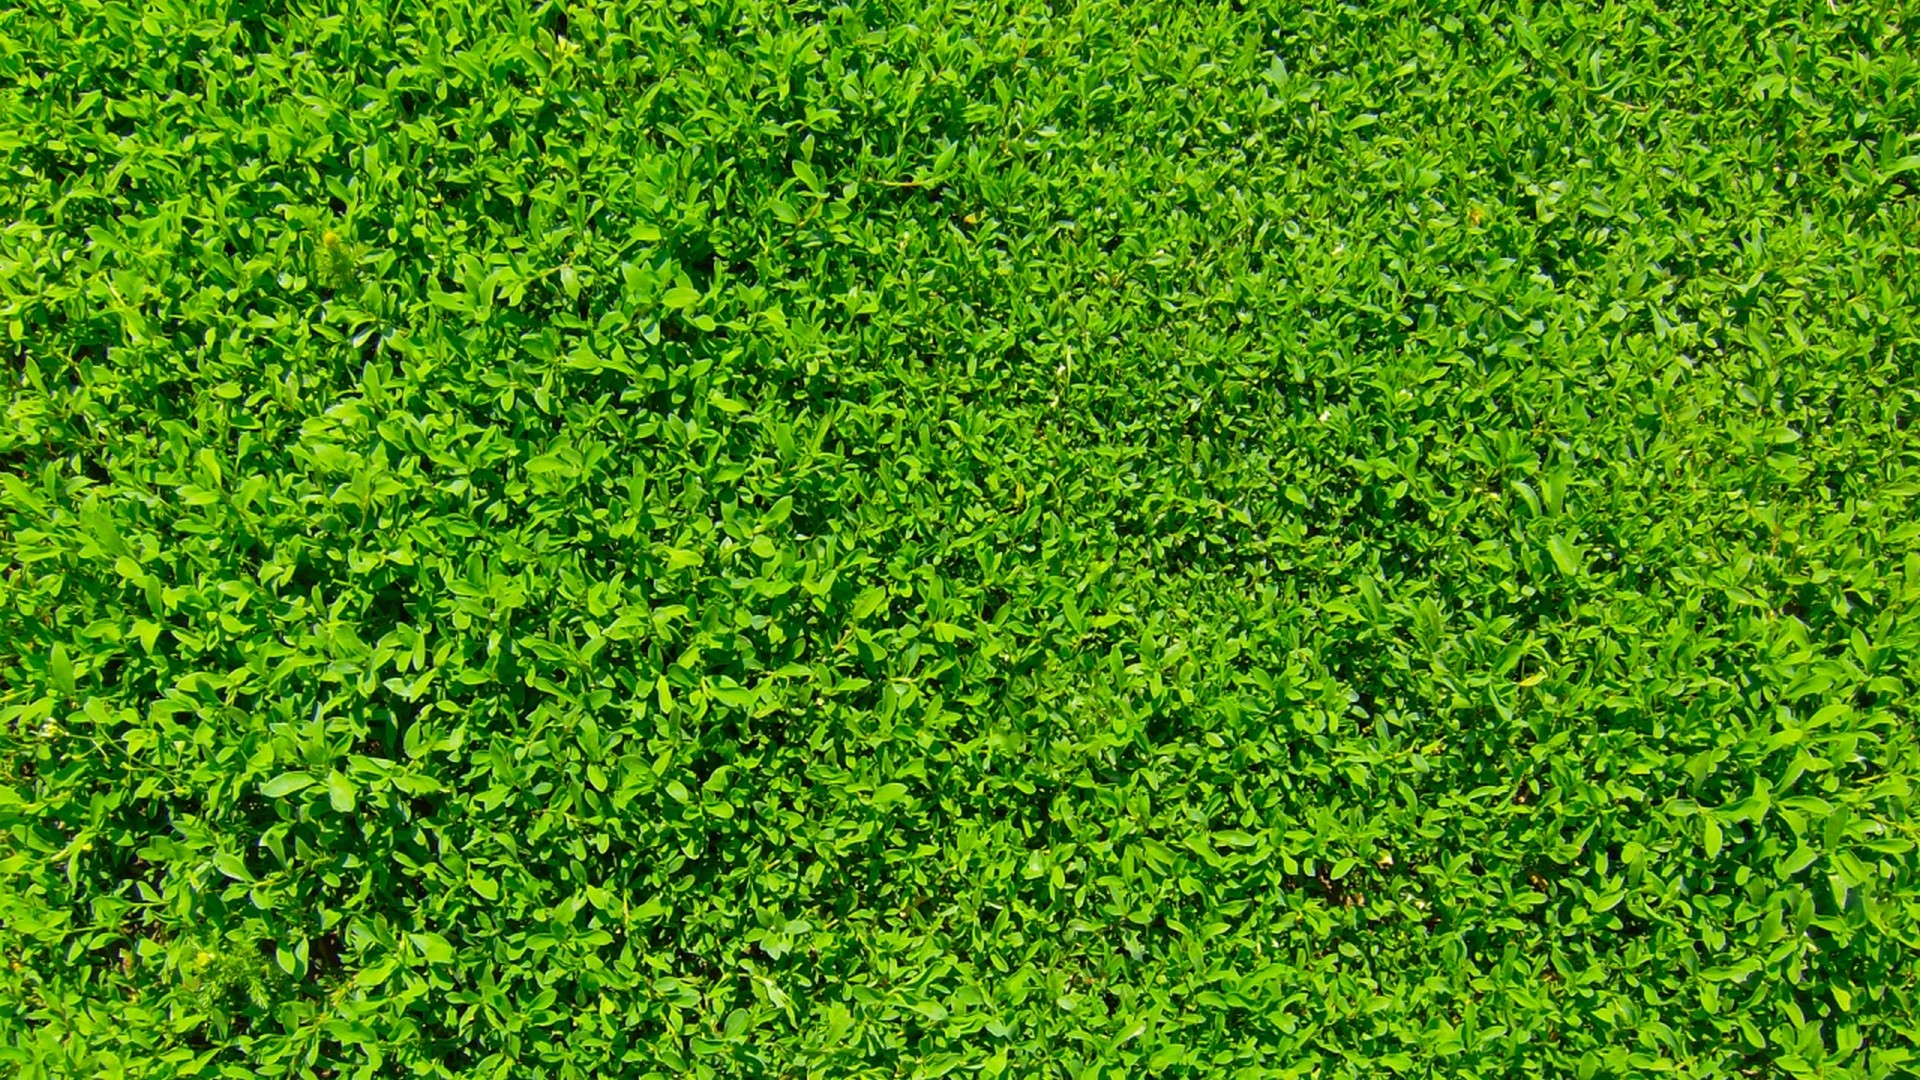 Nature Green Desktop Wallpaper with image resolution 1920x1080 pixel. You can use this wallpaper as background for your desktop Computer Screensavers, Android or iPhone smartphones